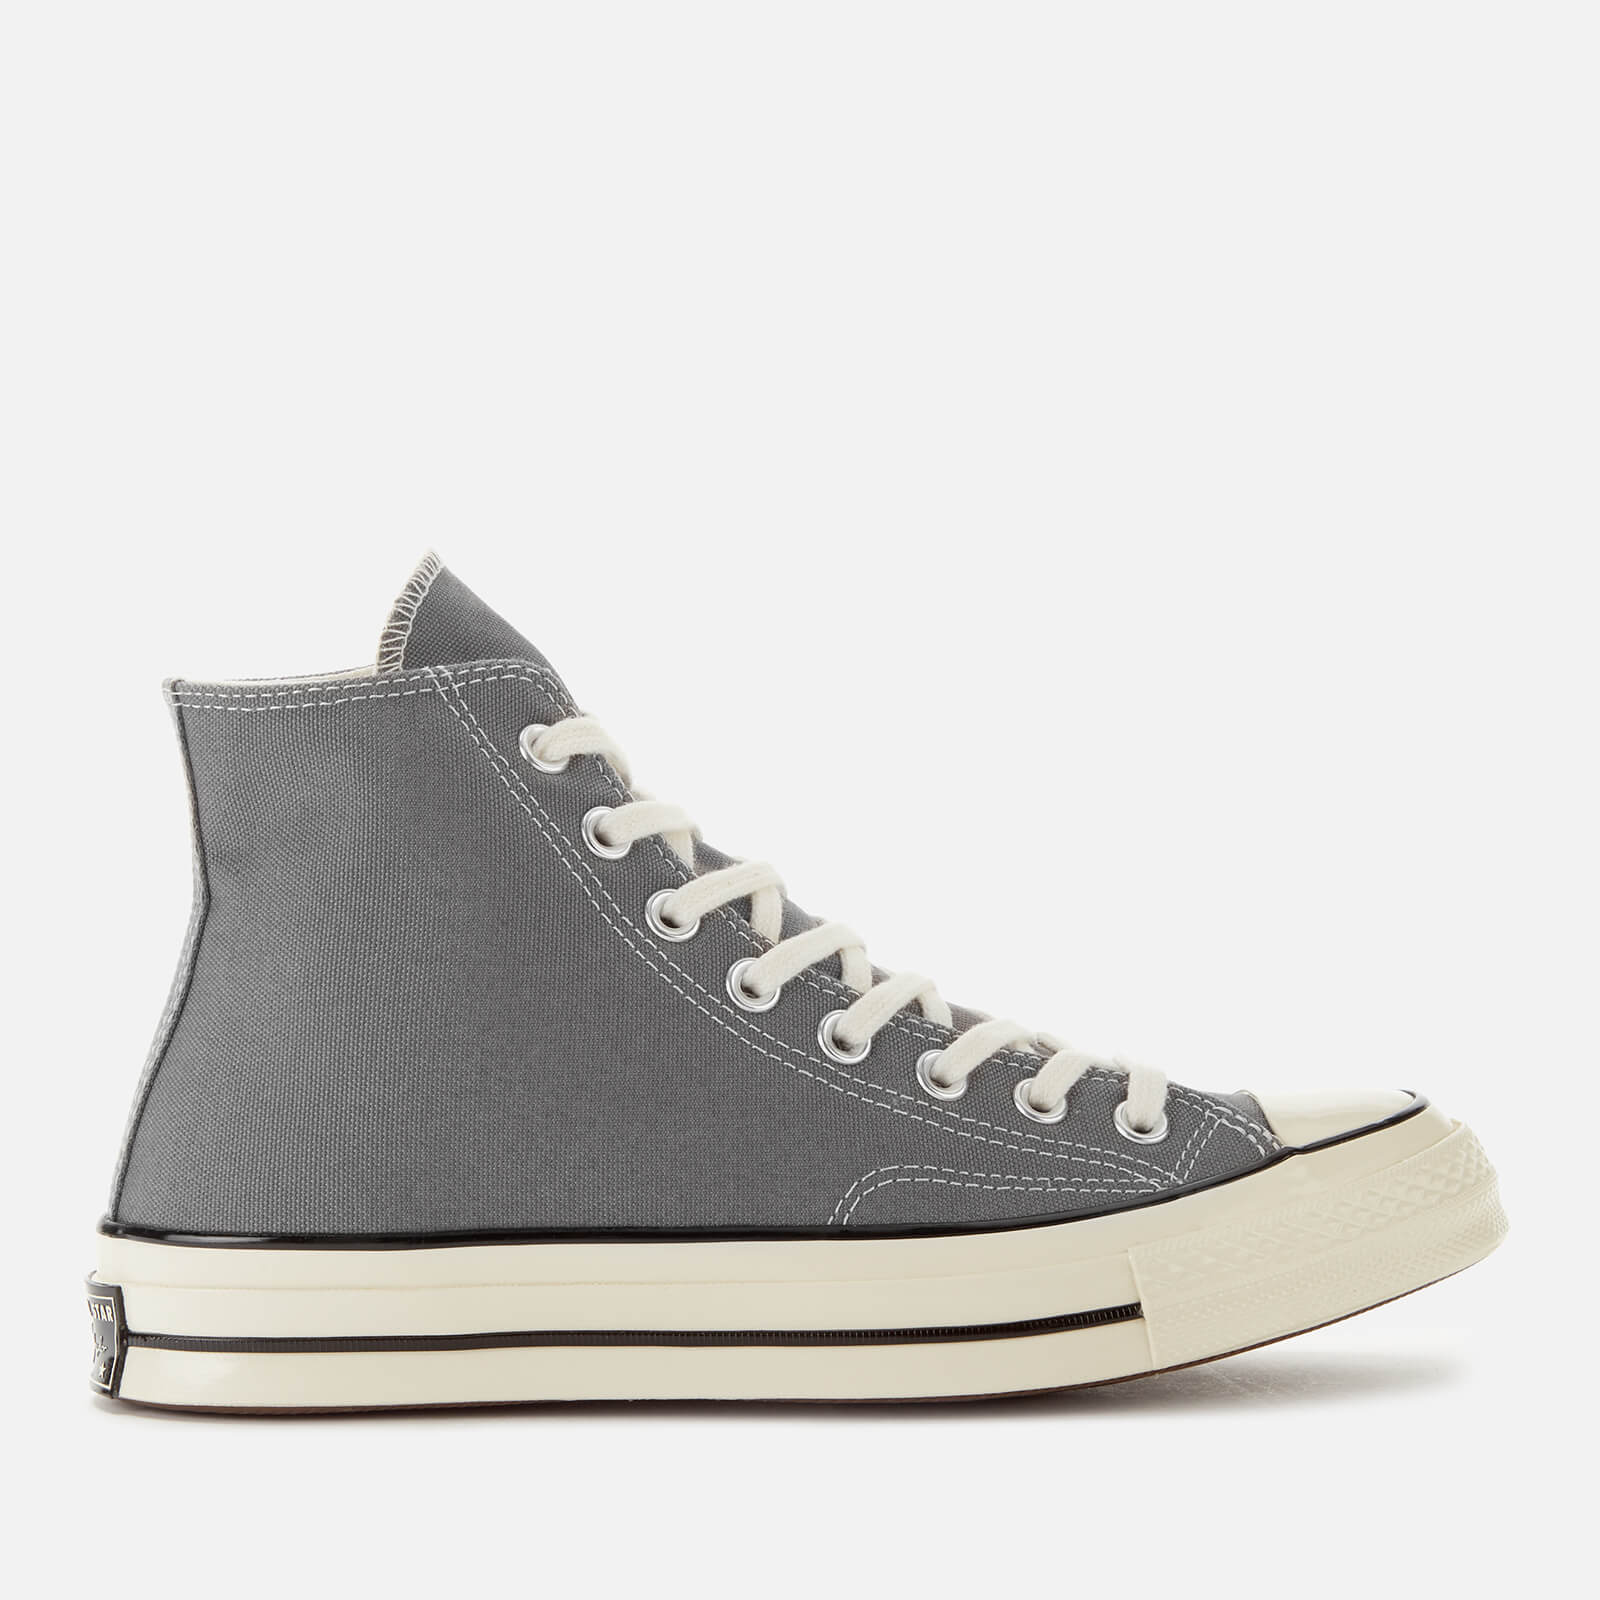 converse chuck taylor all star 70 high top trainers in black